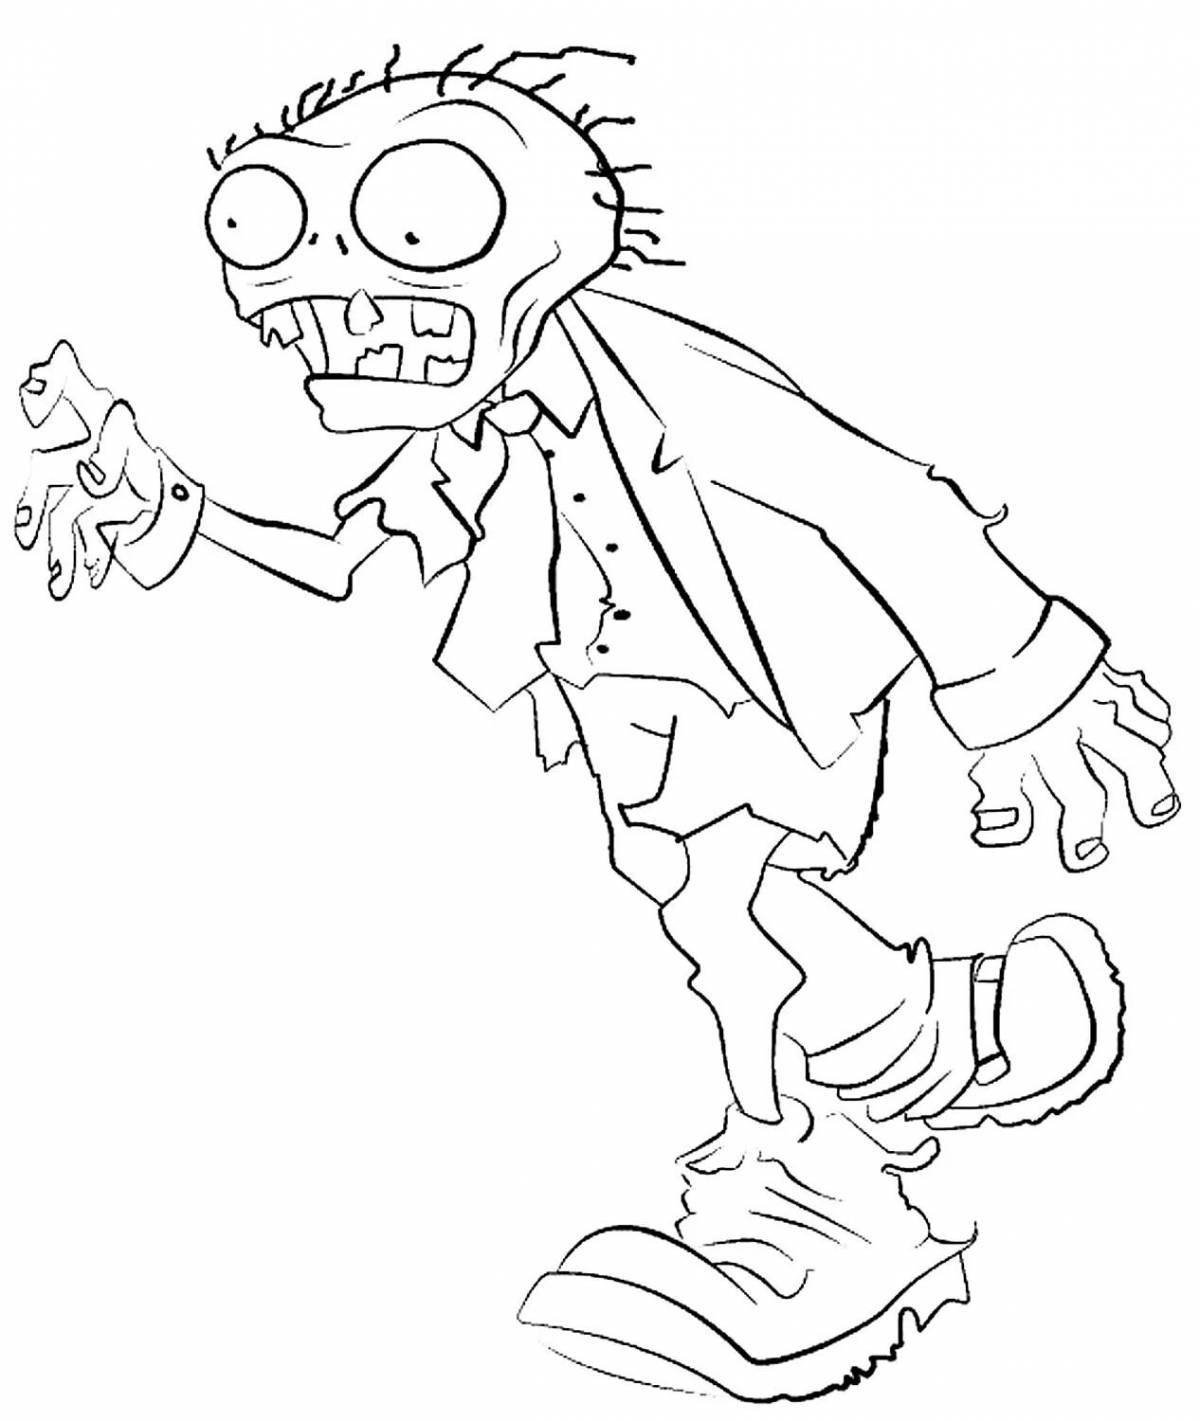 Alarming zombie planet coloring page